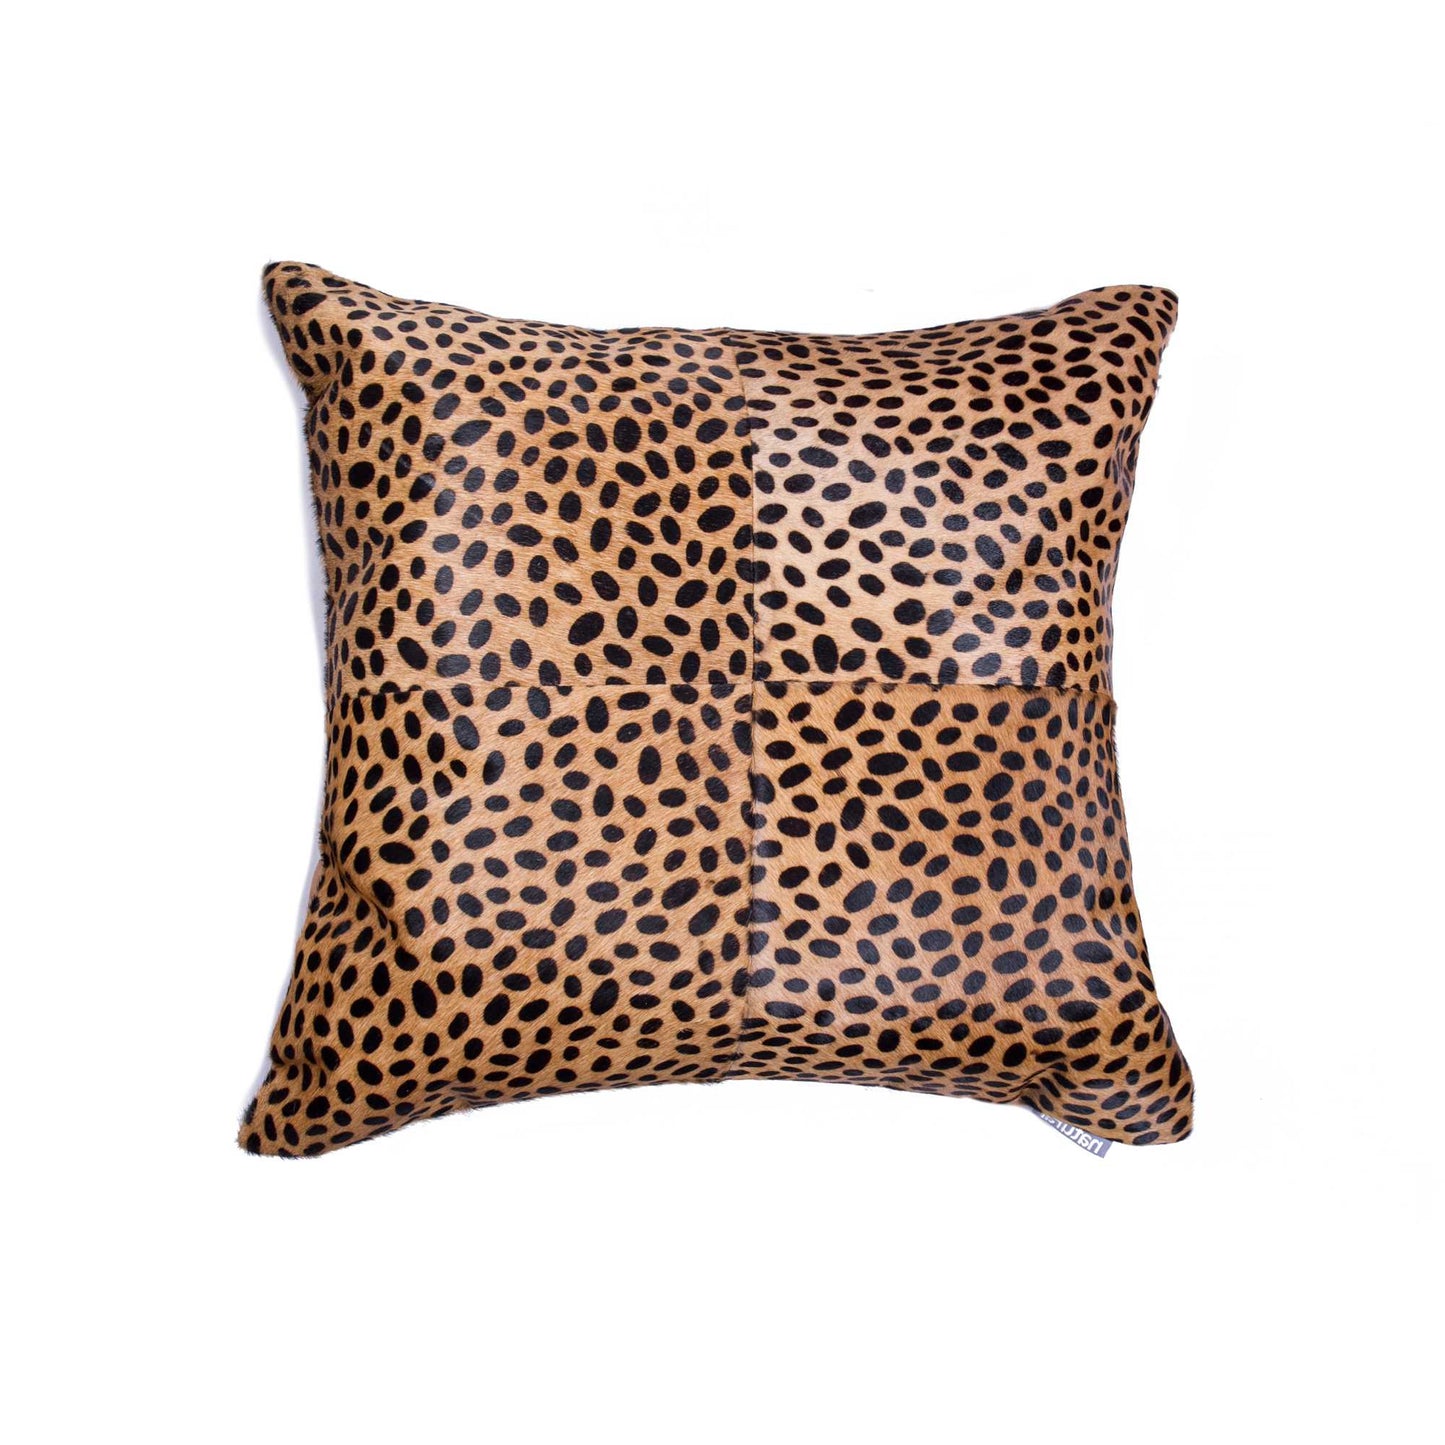 18" Orange and Black Cowhide Throw Pillow